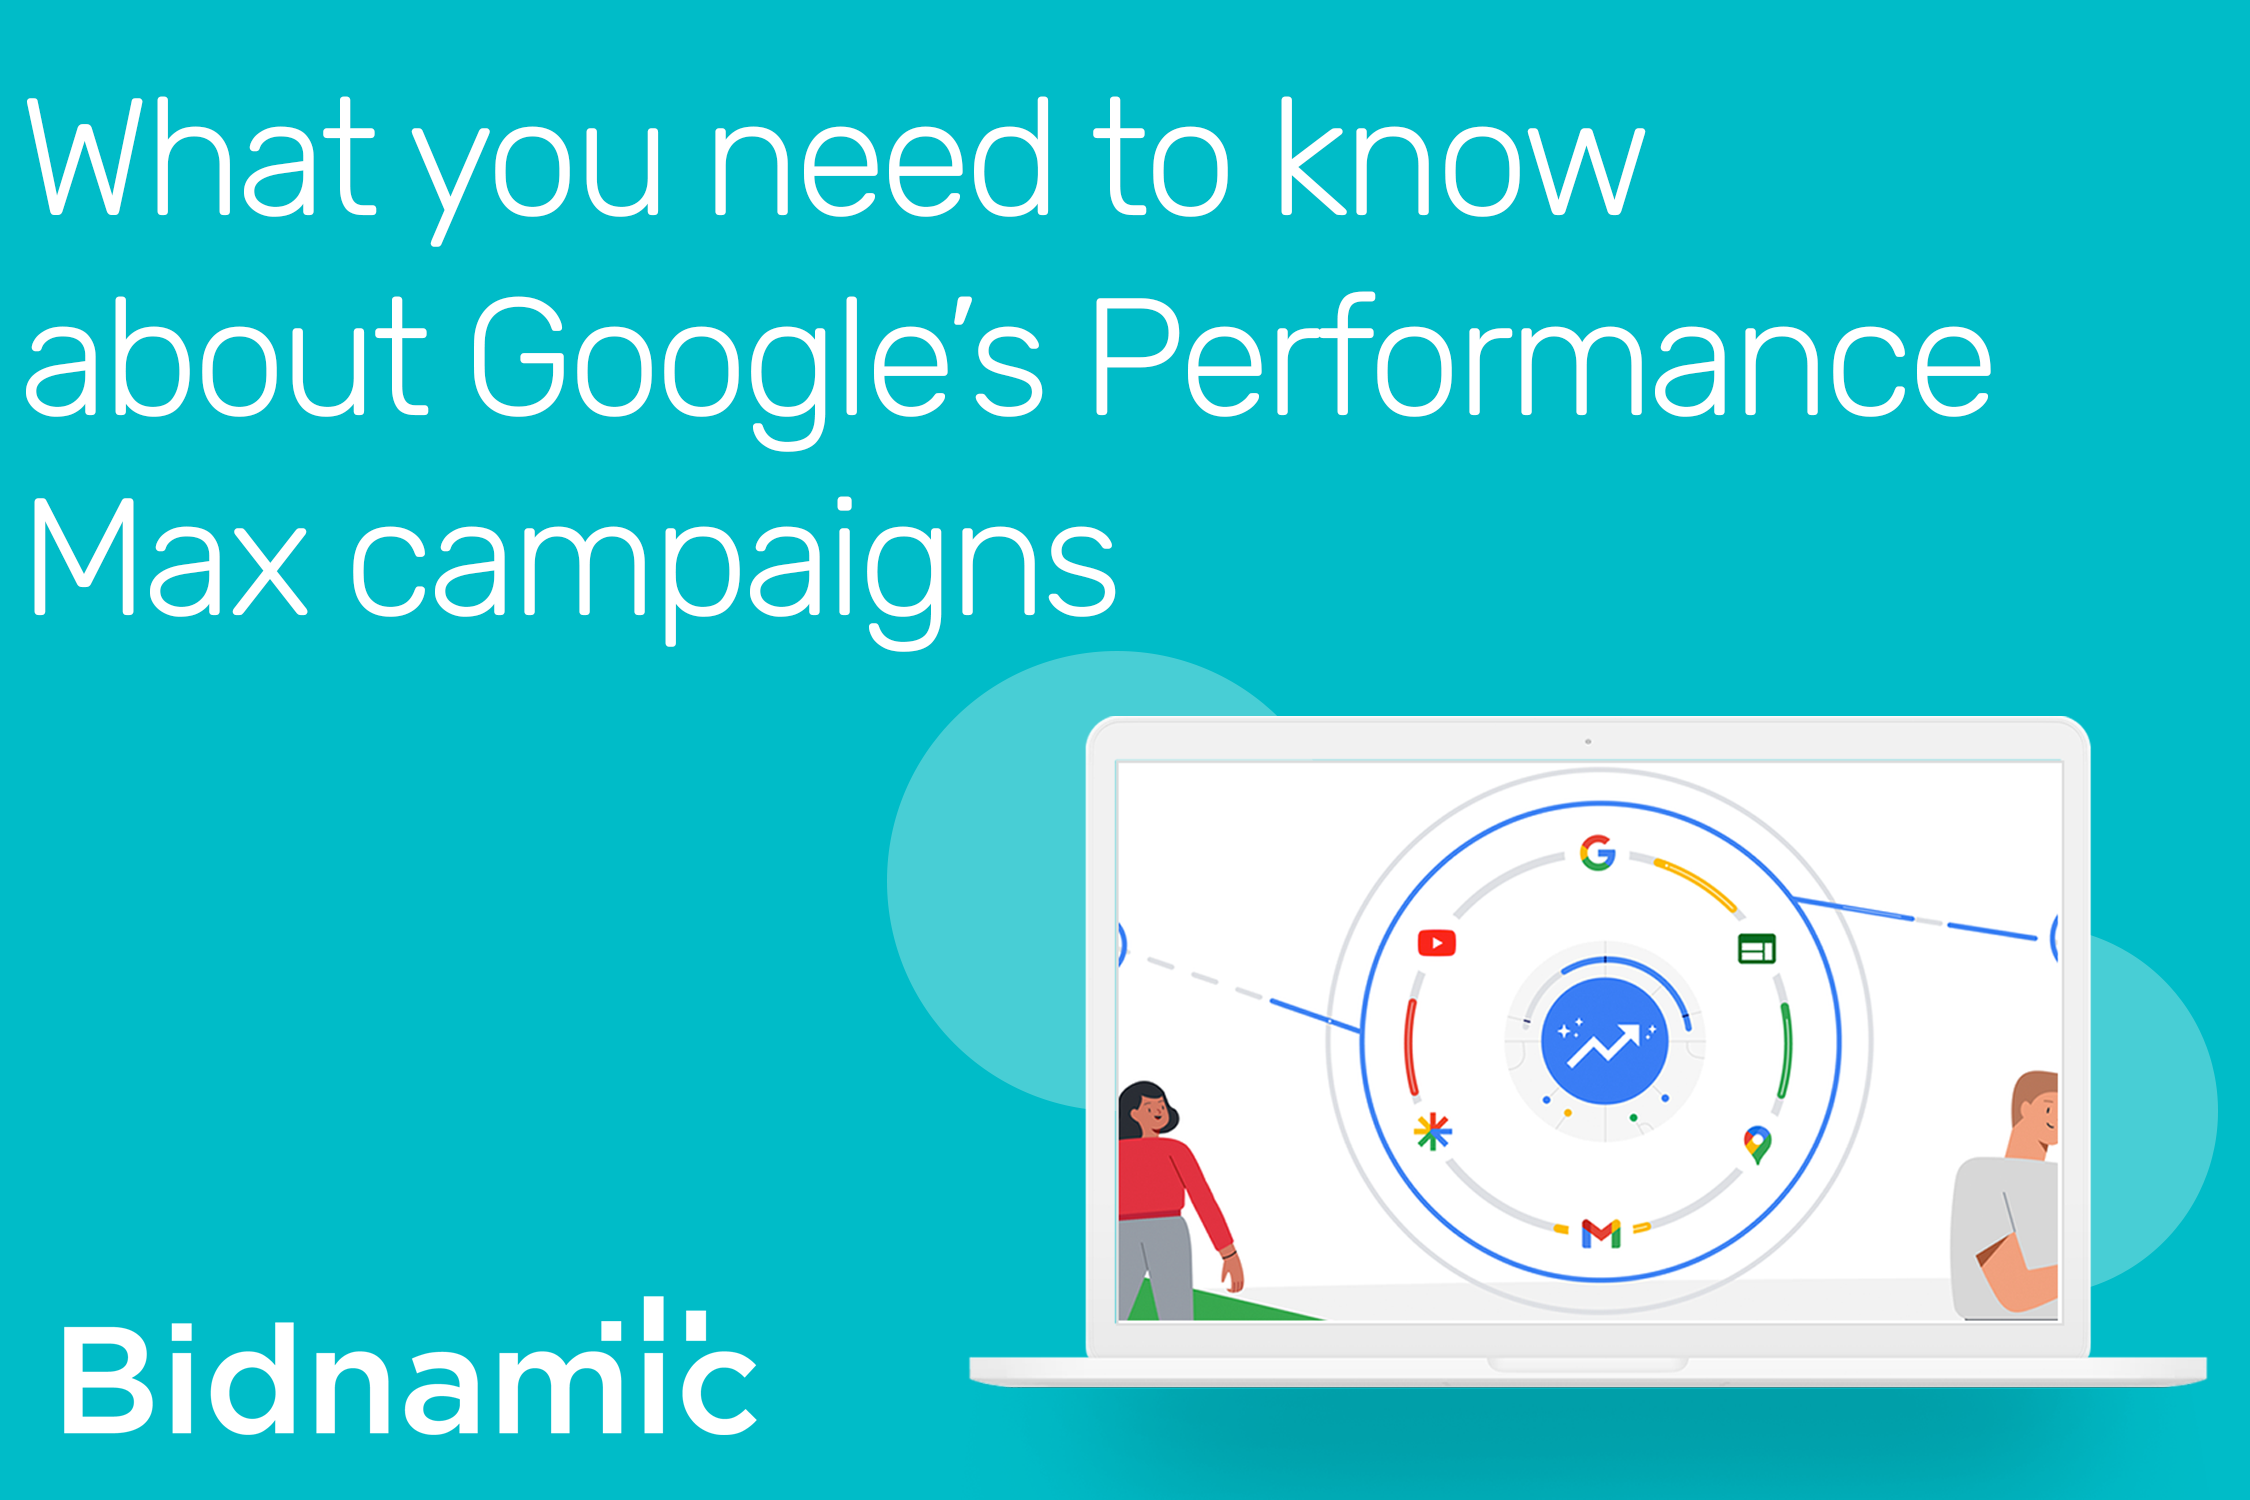 What you need to know about Google’s Performance Max campaigns